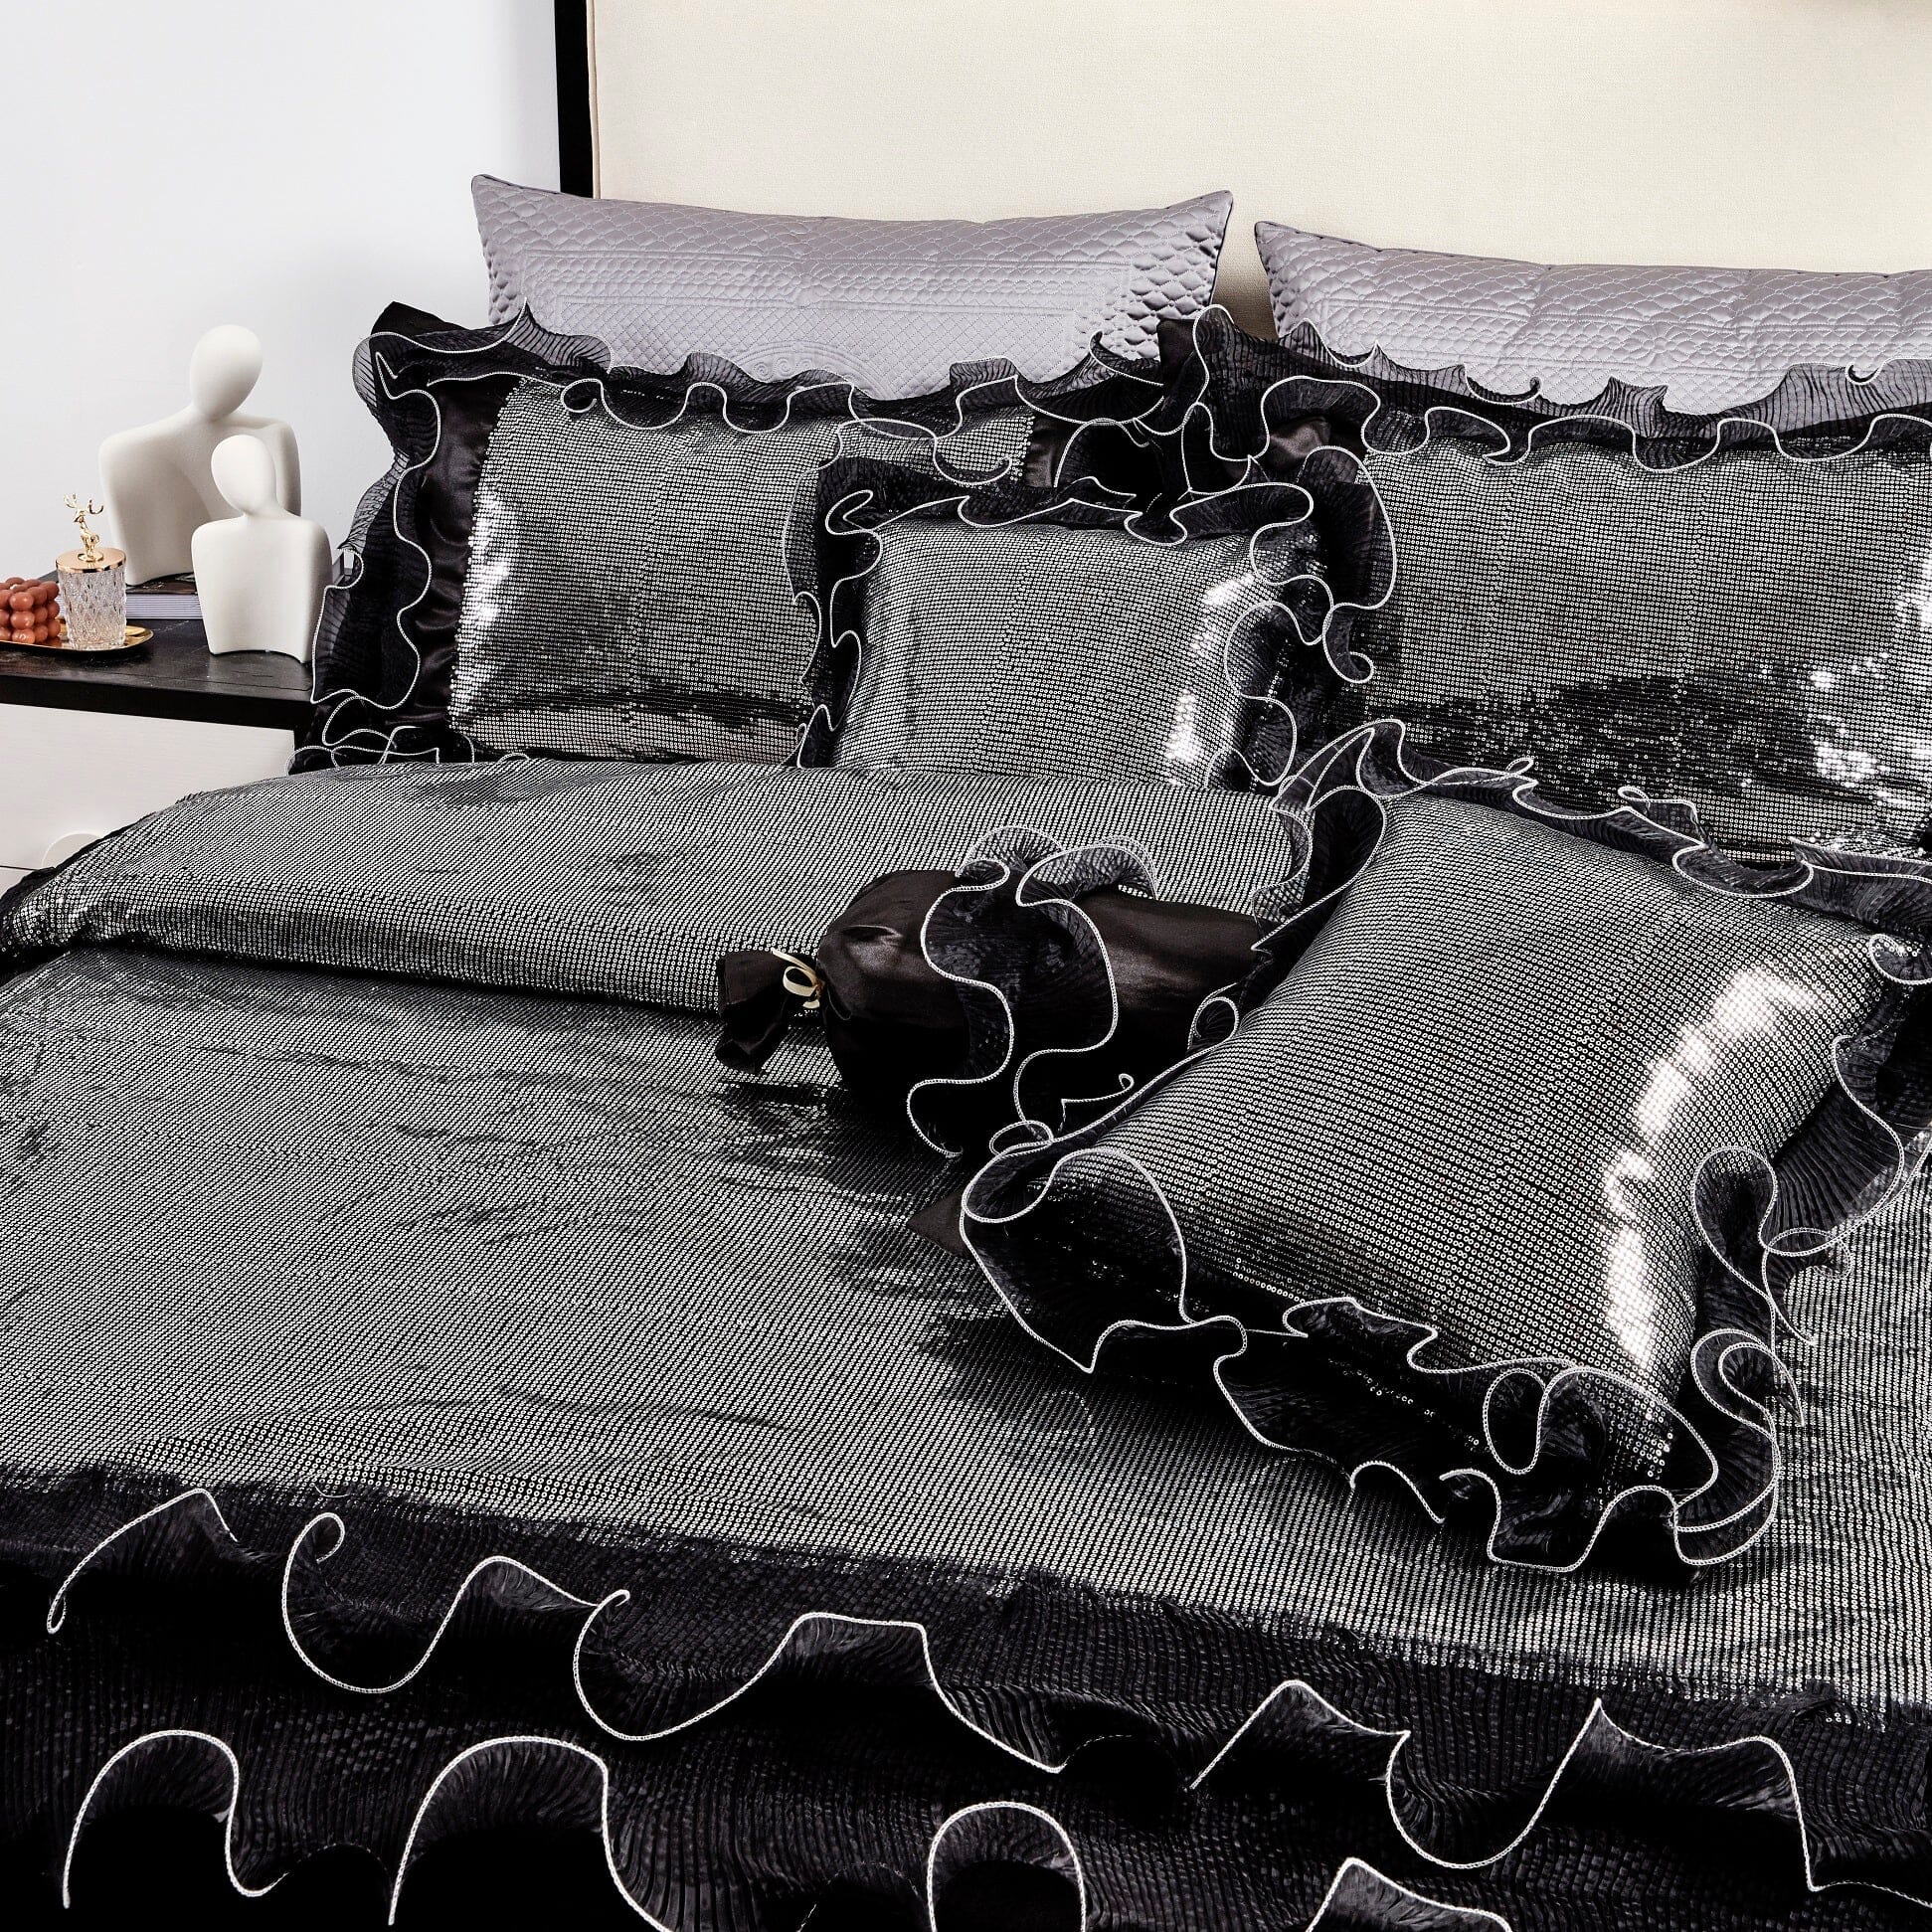 Tache Luxurious Glam Night Out Silver Sequin Black Organza Ruffle 6pc Comforter Bedding Set (1622)